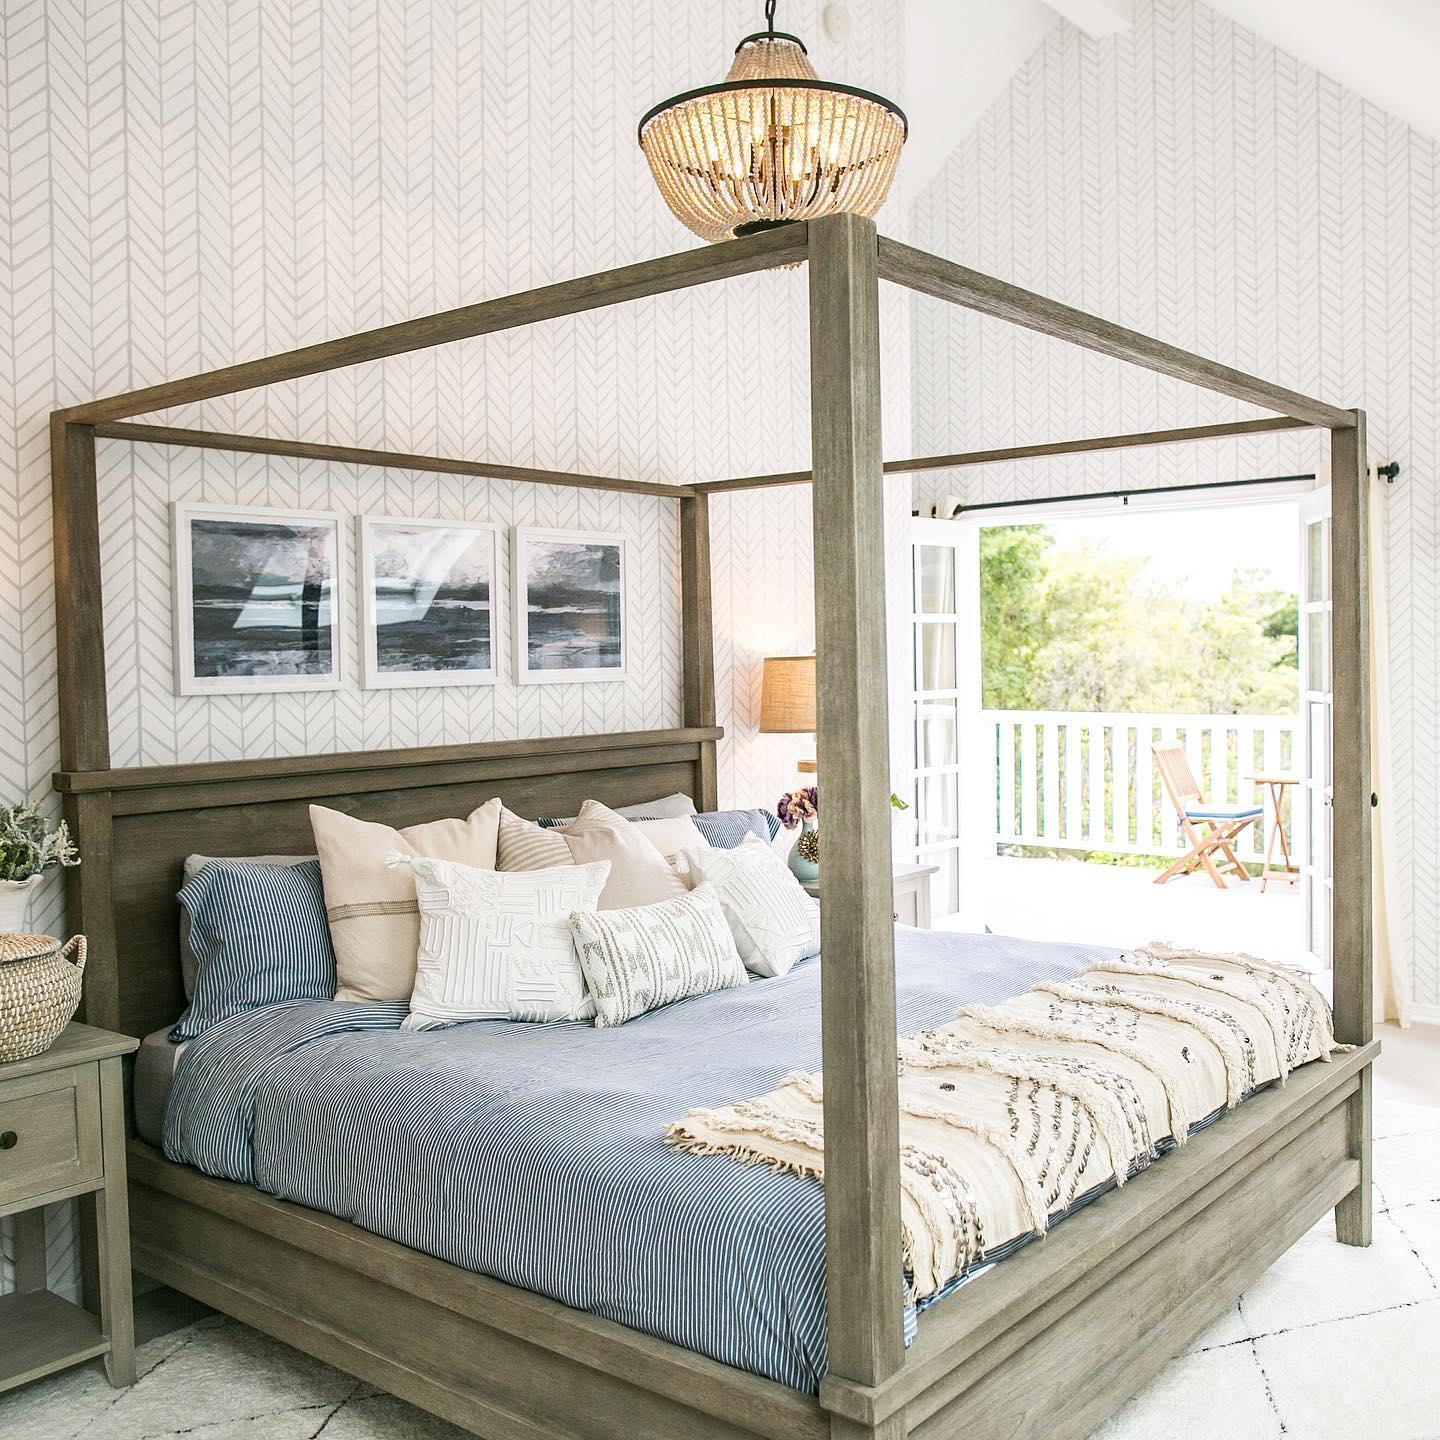 Pottery Barn On Twitter Simplicity At Its Best The Straight Lines And Heirloom Appeal Of Our Farmhouse Canopy Bed Create The Perfect Focal Point For Your Bedroom Mystylebythesea Https Tco M0pt44c8nq